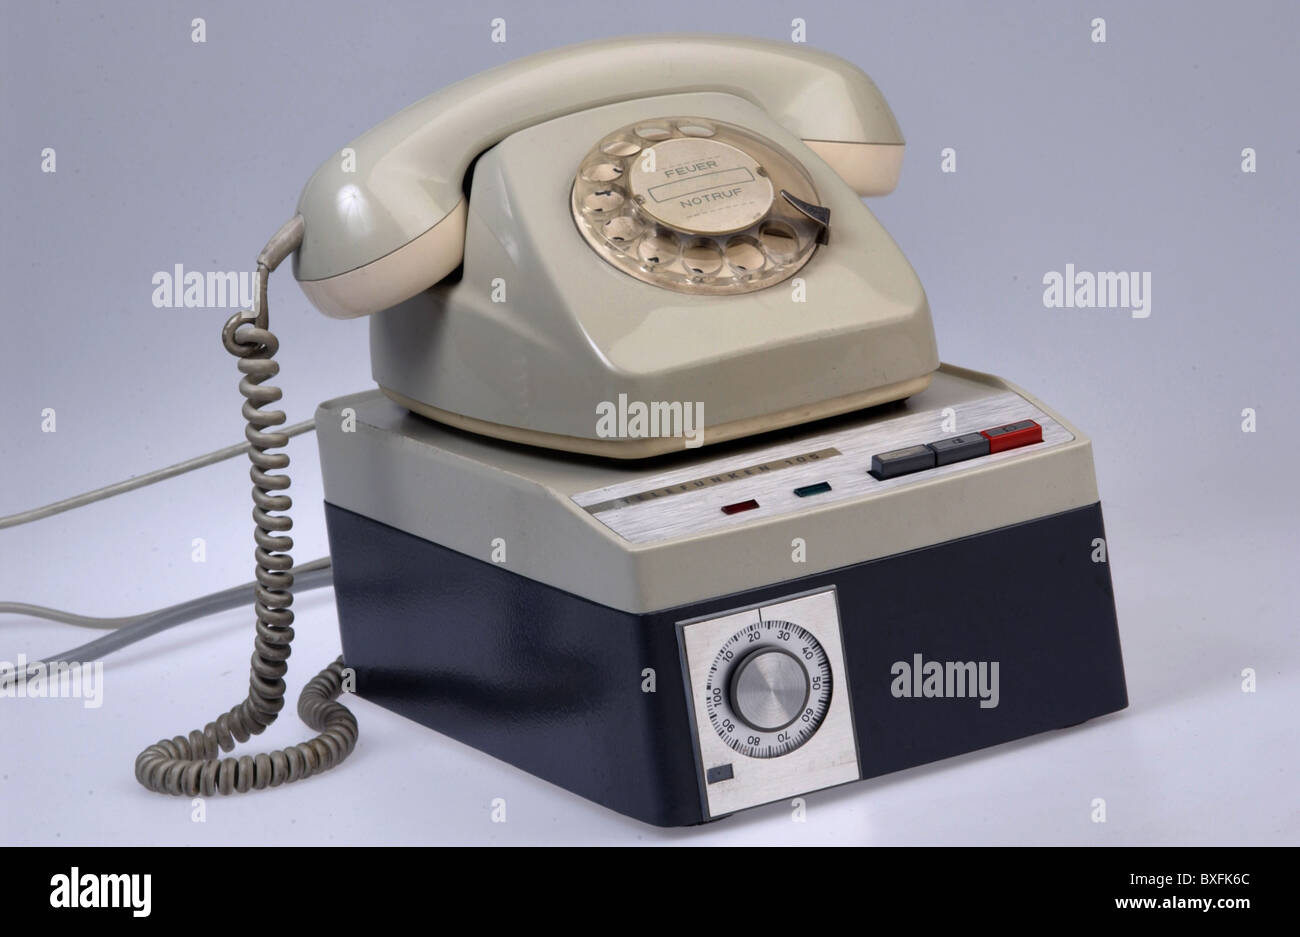 The History of the Answering Machine